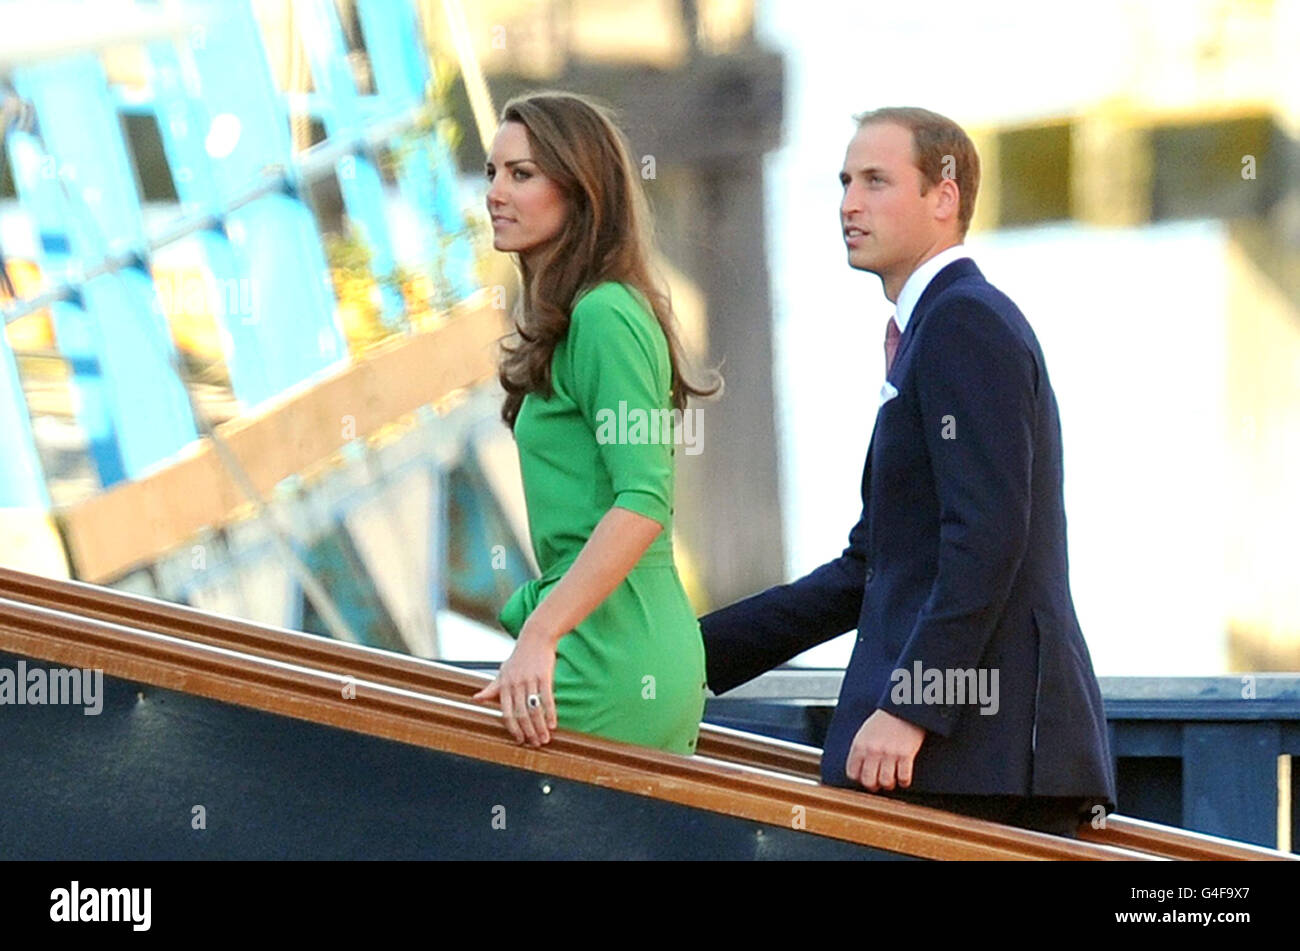 The Duke and Duchess of cambridge arrive for an evening reception onboard the Royal Yacht Britannia in Leith, Edinburgh, on the night before the wedding of Zara Phillips and Mike Tindall. Stock Photo